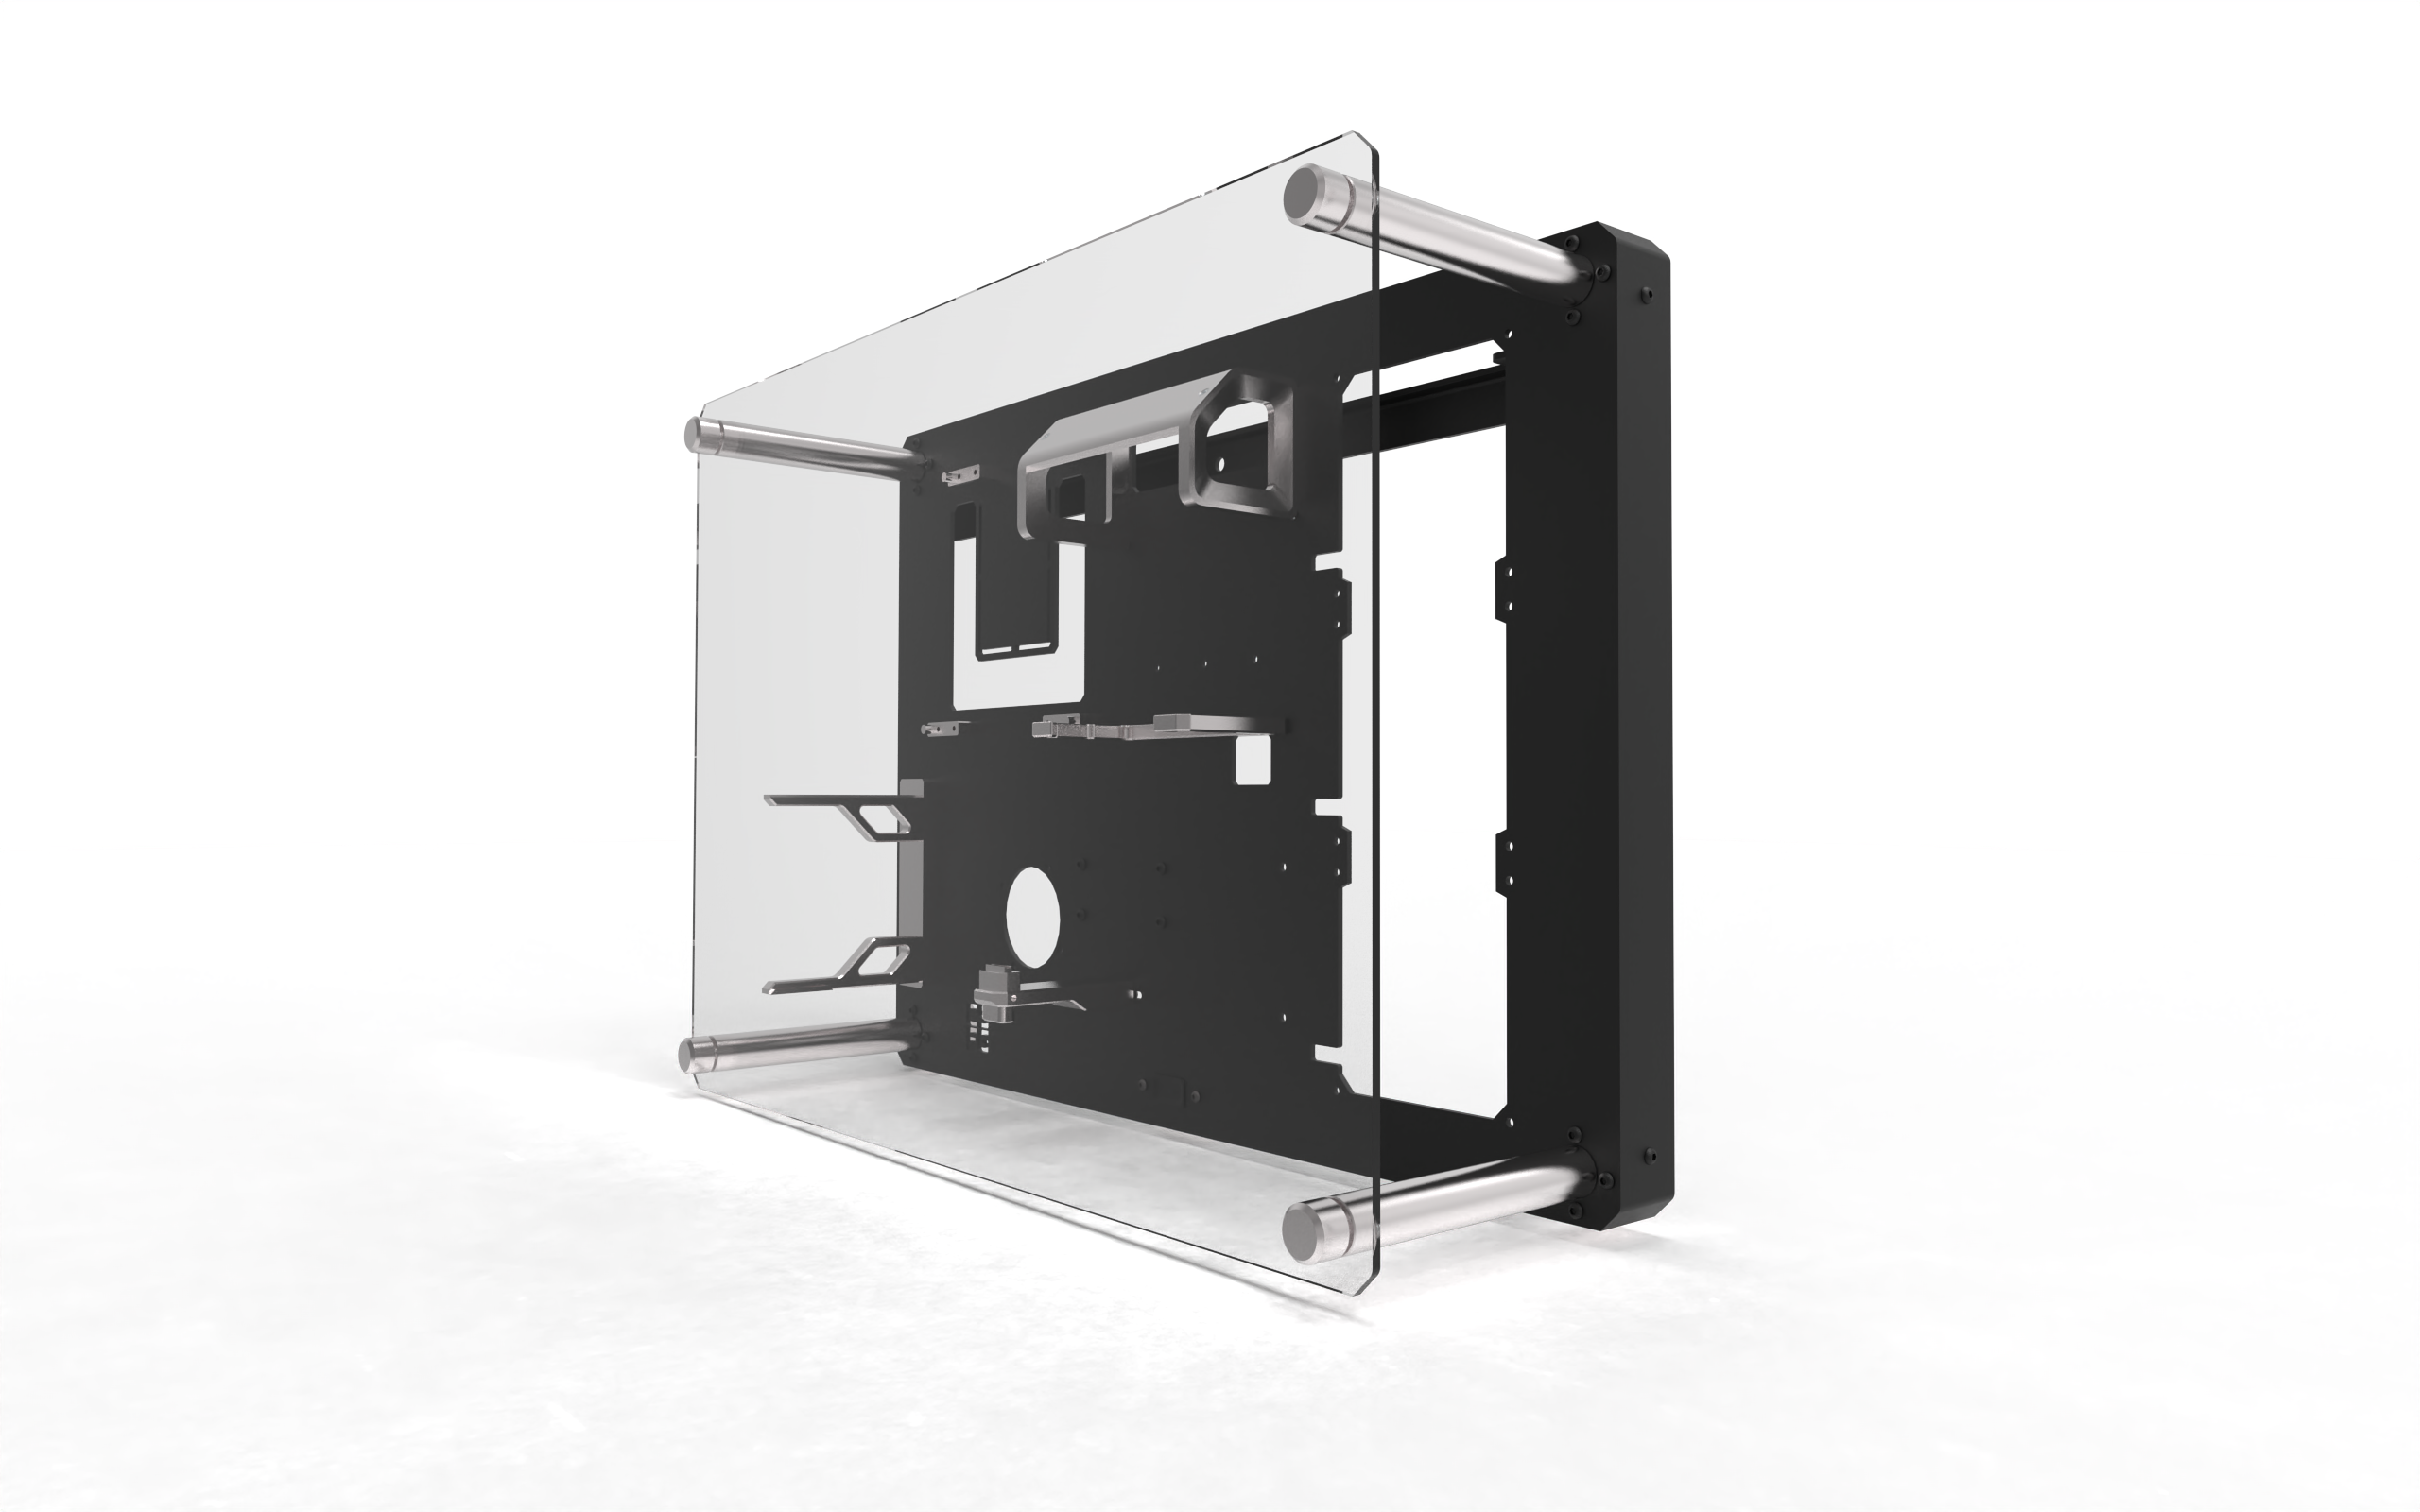 csfg-creative-solutions-for-gamers - CSFG Creative Solutions For Gamers Frostbite M-ITX Wall mounted Chassis - Black